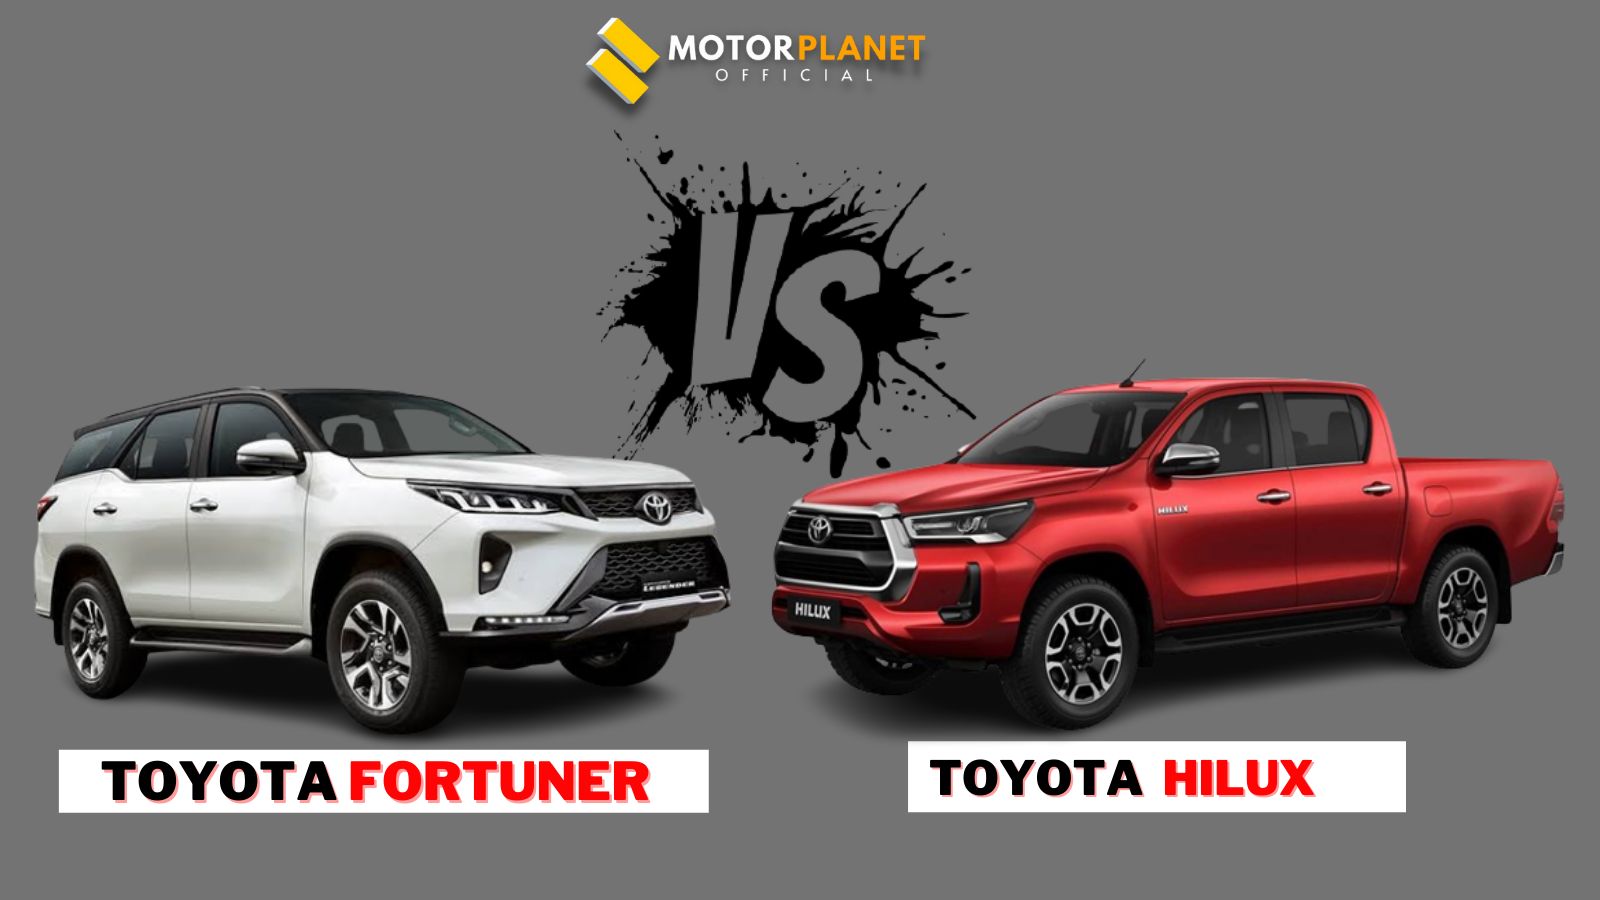 Toyota Fortuner Vs Toyota Hilux: Which one should you choose?